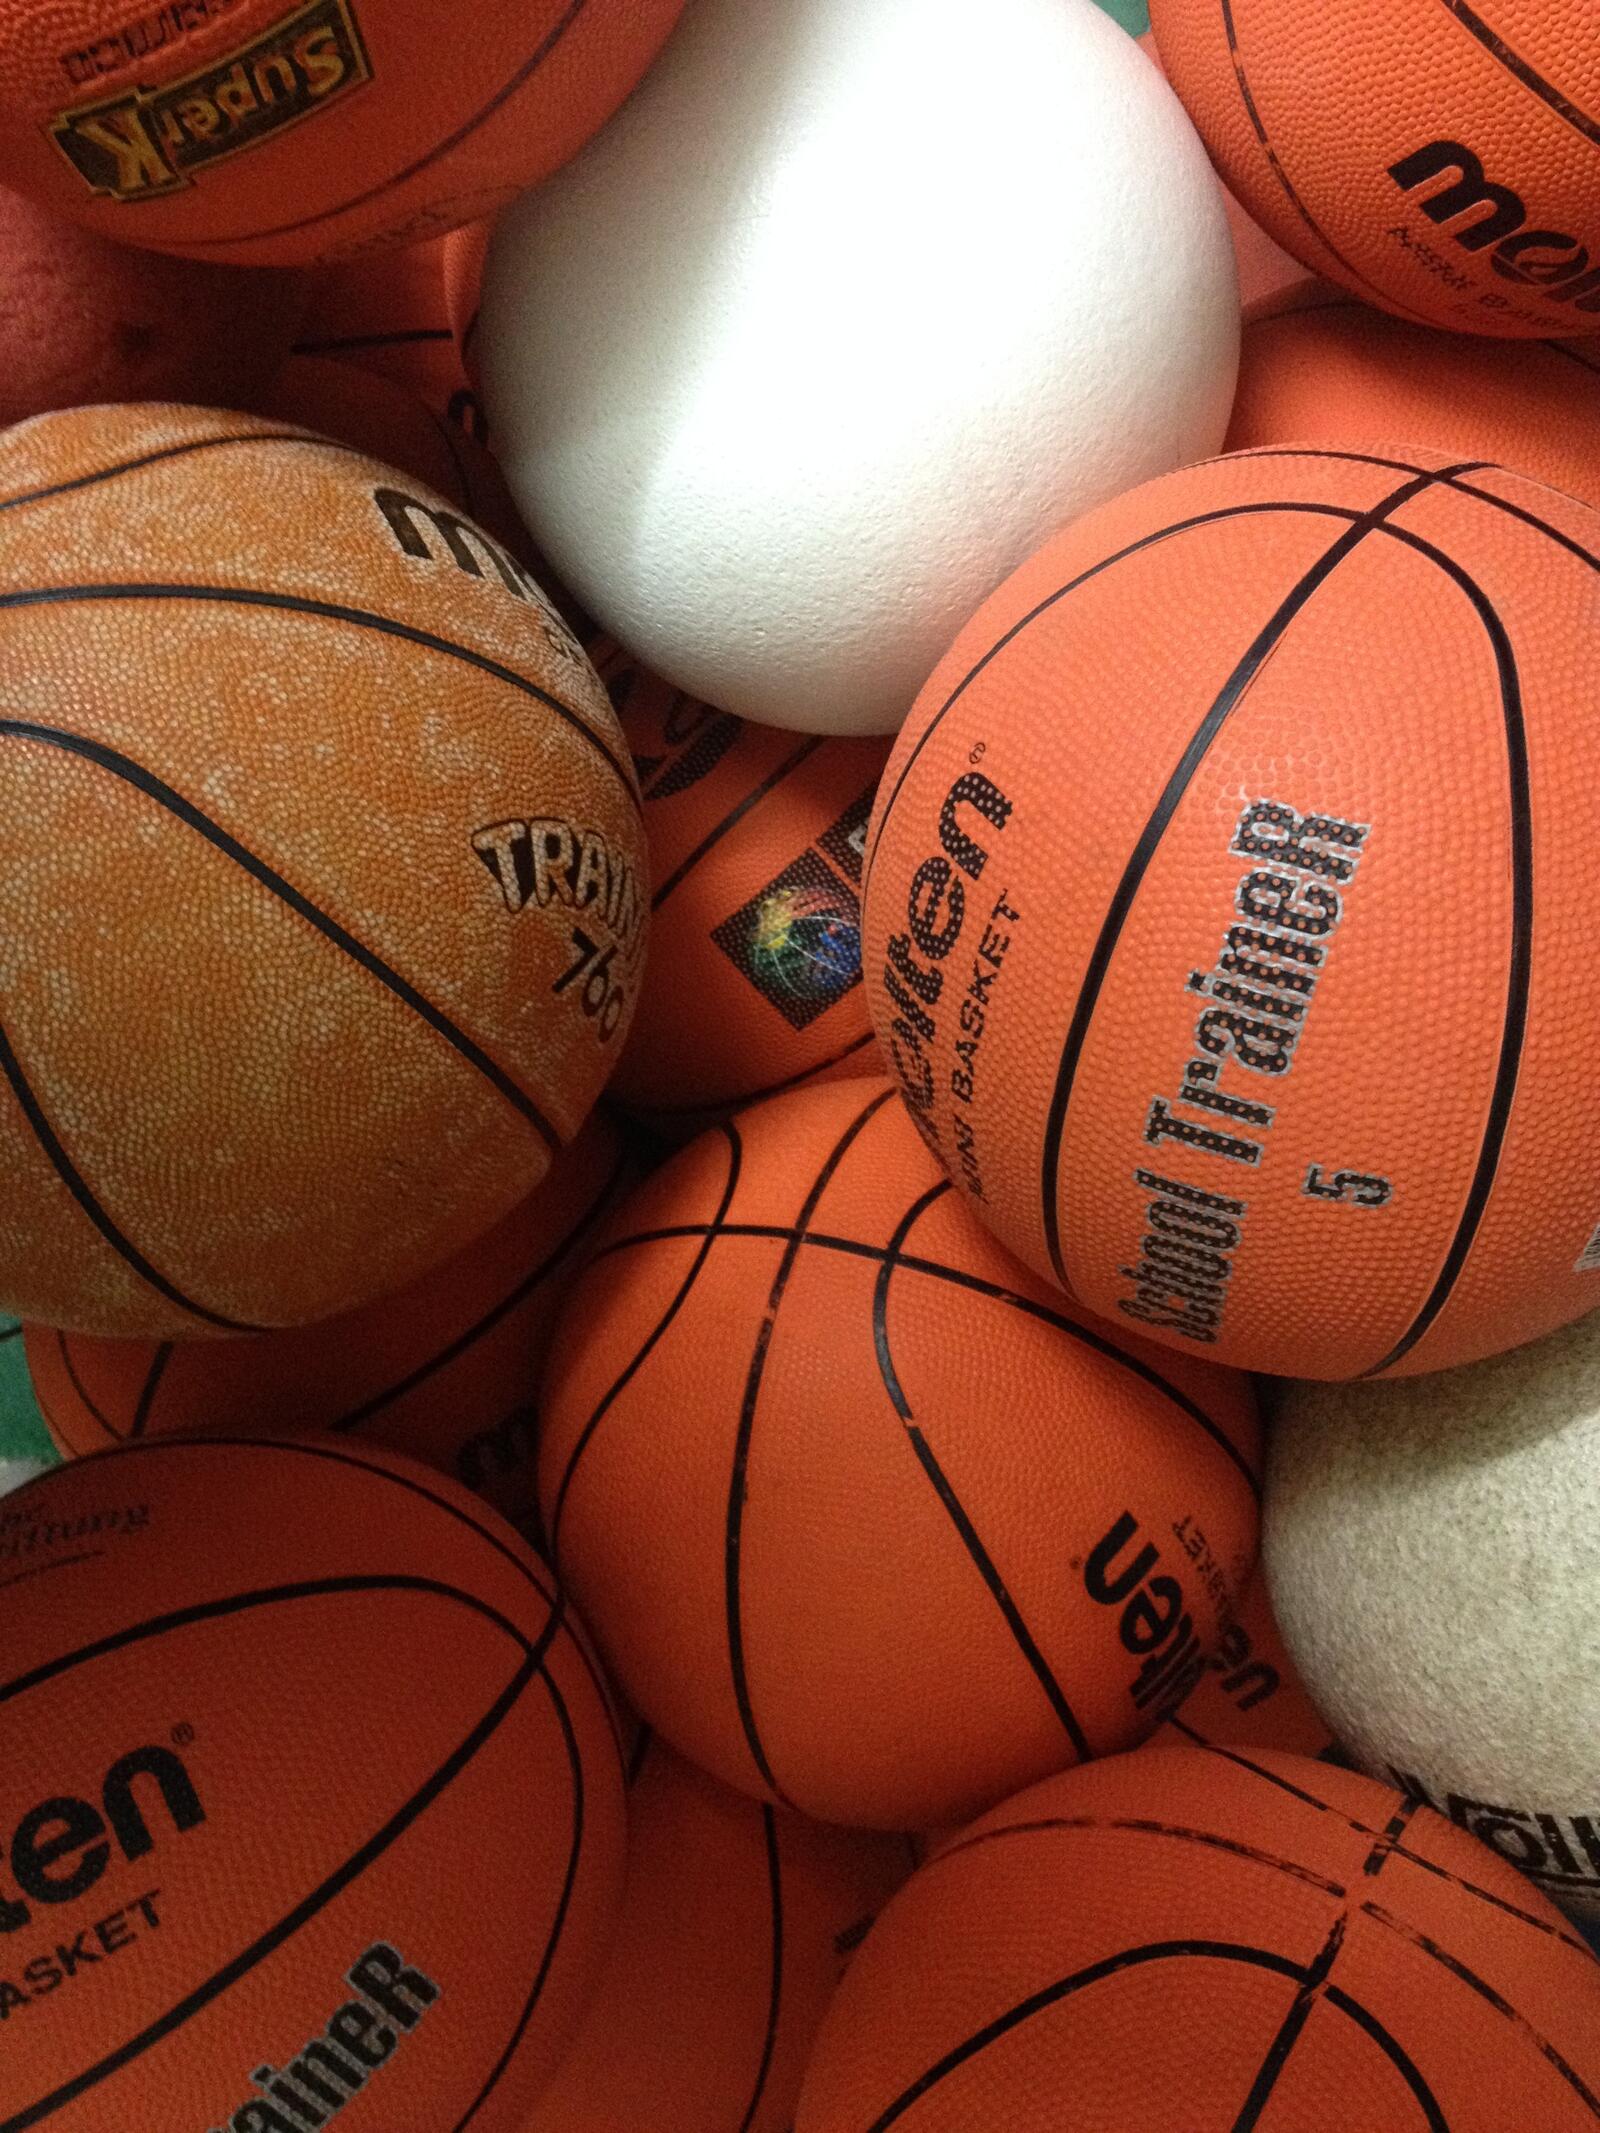 Free photo A bunch of basketballs